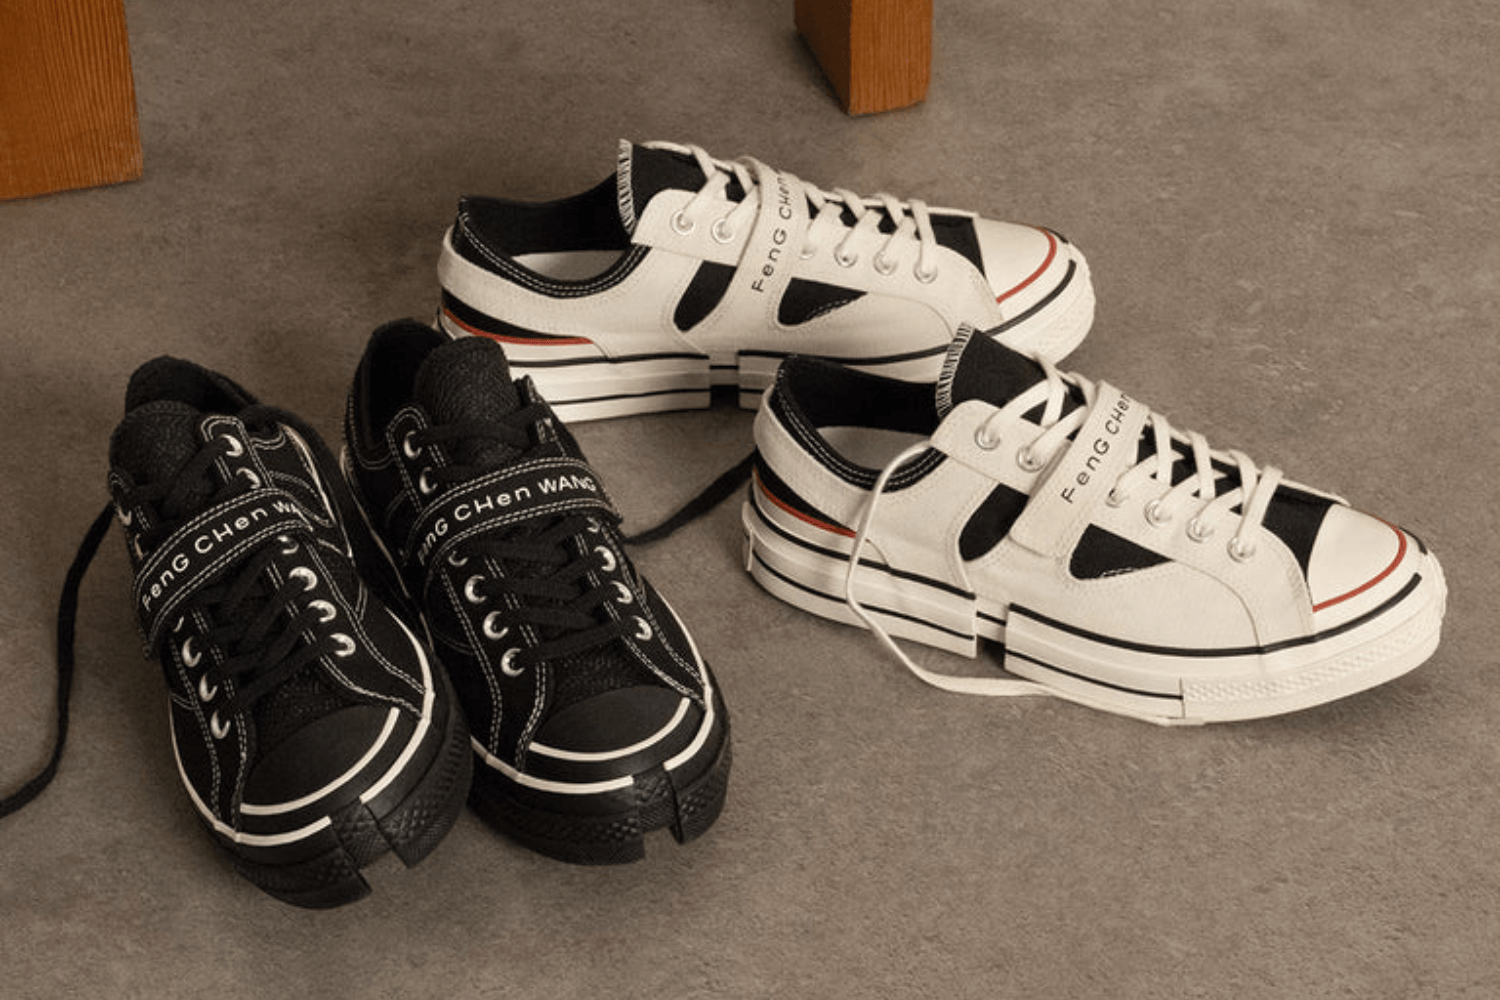 Feng Chen Wang and Converse expand 2-in-1 Chuck 70 series